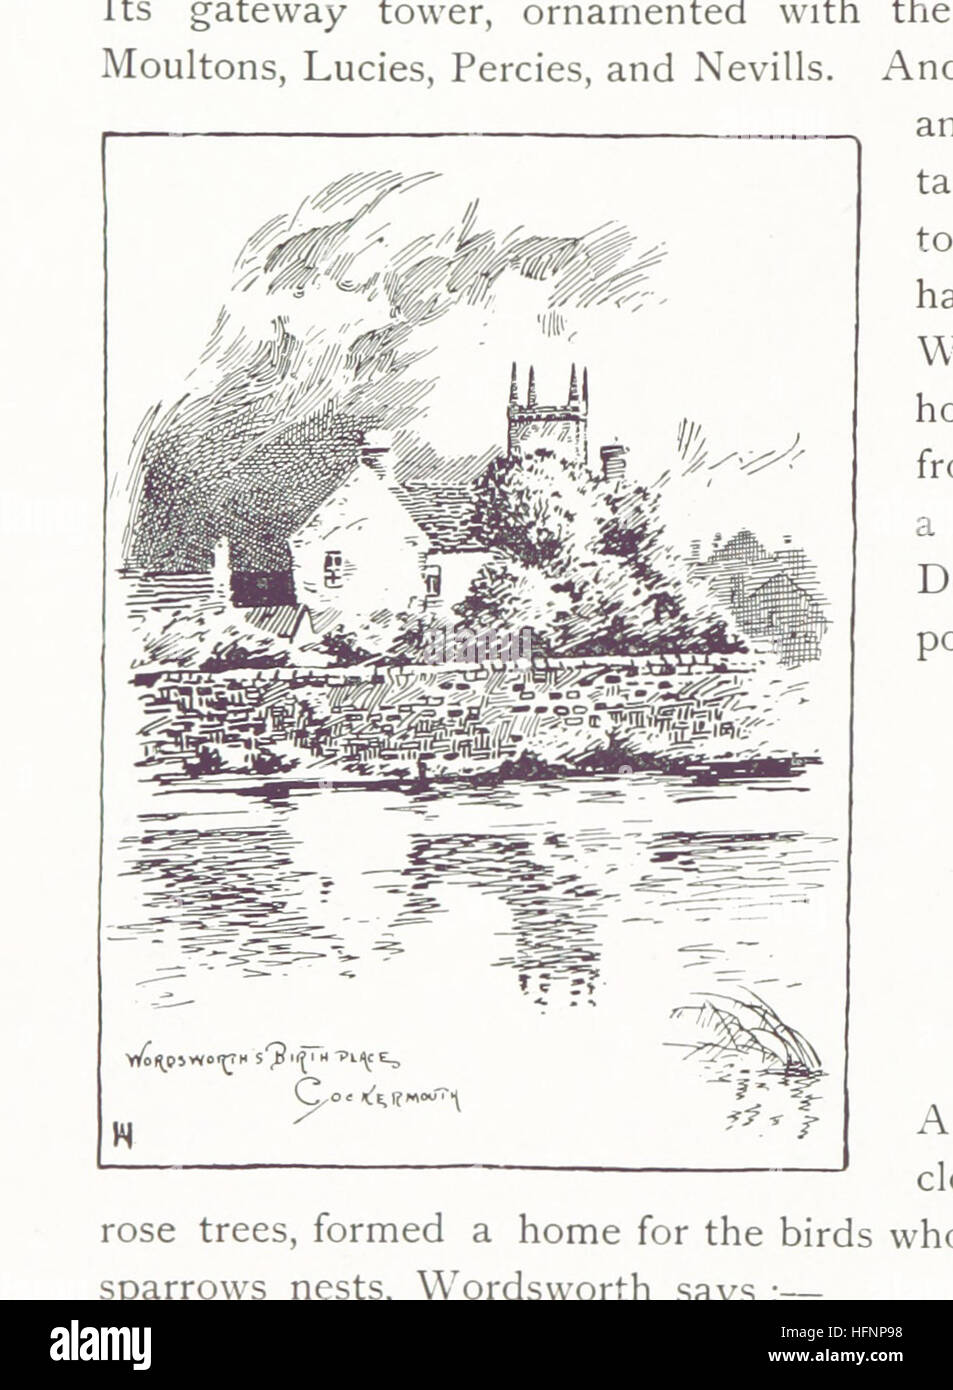 Image taken from page 578 of 'Two Thousand Miles of Wandering in the Border Country, Lakeland and Ribblesdale, etc' Image taken from page 578 of 'Two Thousand Miles of Stock Photo